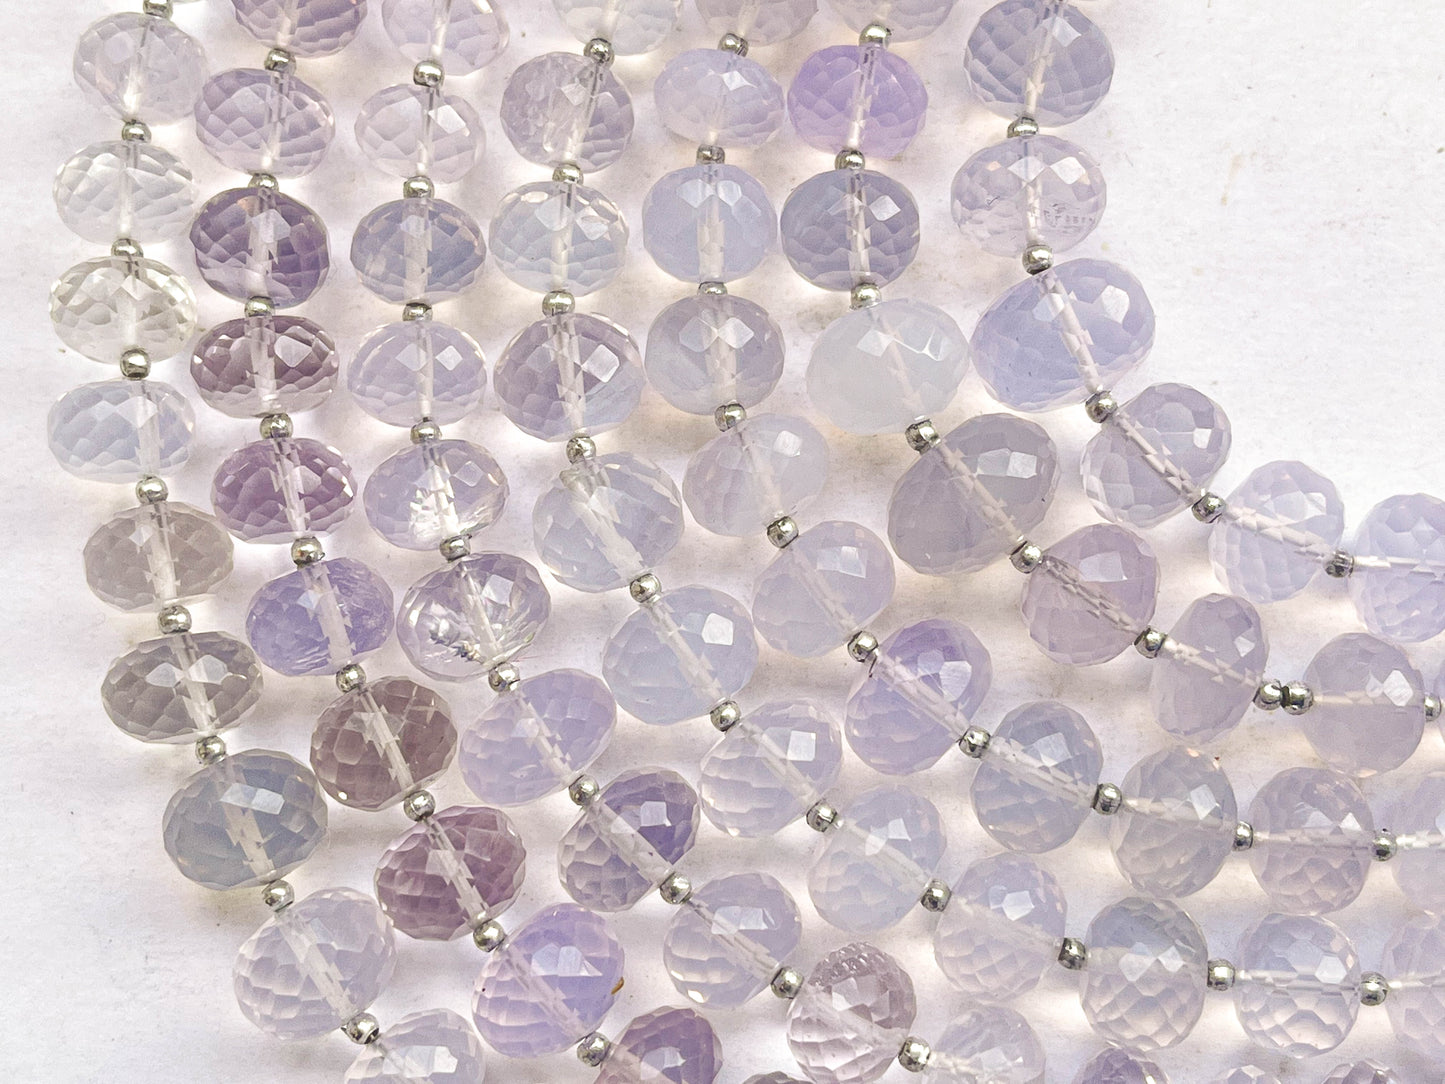 Scorolite Lavender Quartz Faceted Rondelle Beads | 7.50 Inch Beadsforyourjewelry